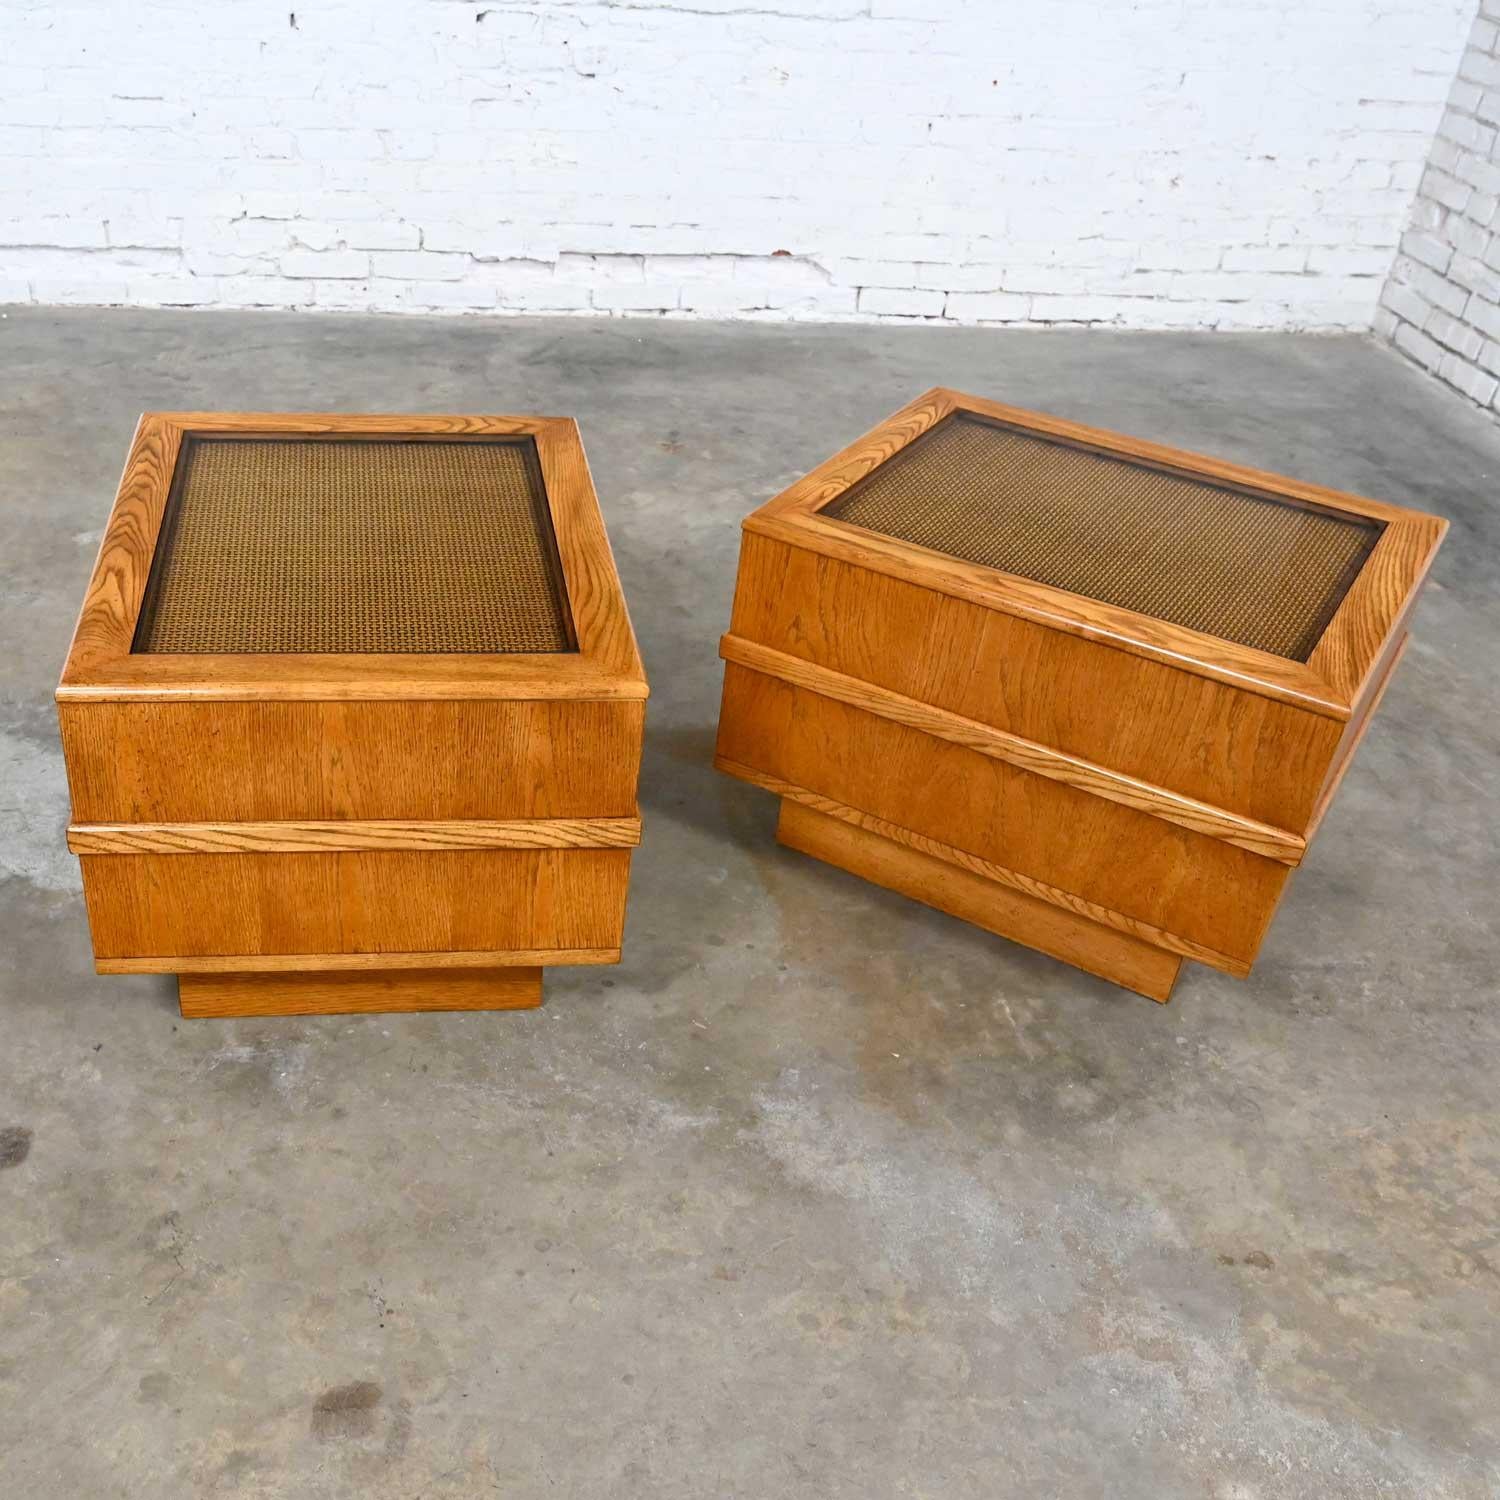 Wonderful Modern oak pedestal base end tables, side tables, or nightstands, with cane and glass insert tabletops. Beautiful condition, keeping in mind that these are vintage and not new so will have signs of use and wear. Please see photos and zoom